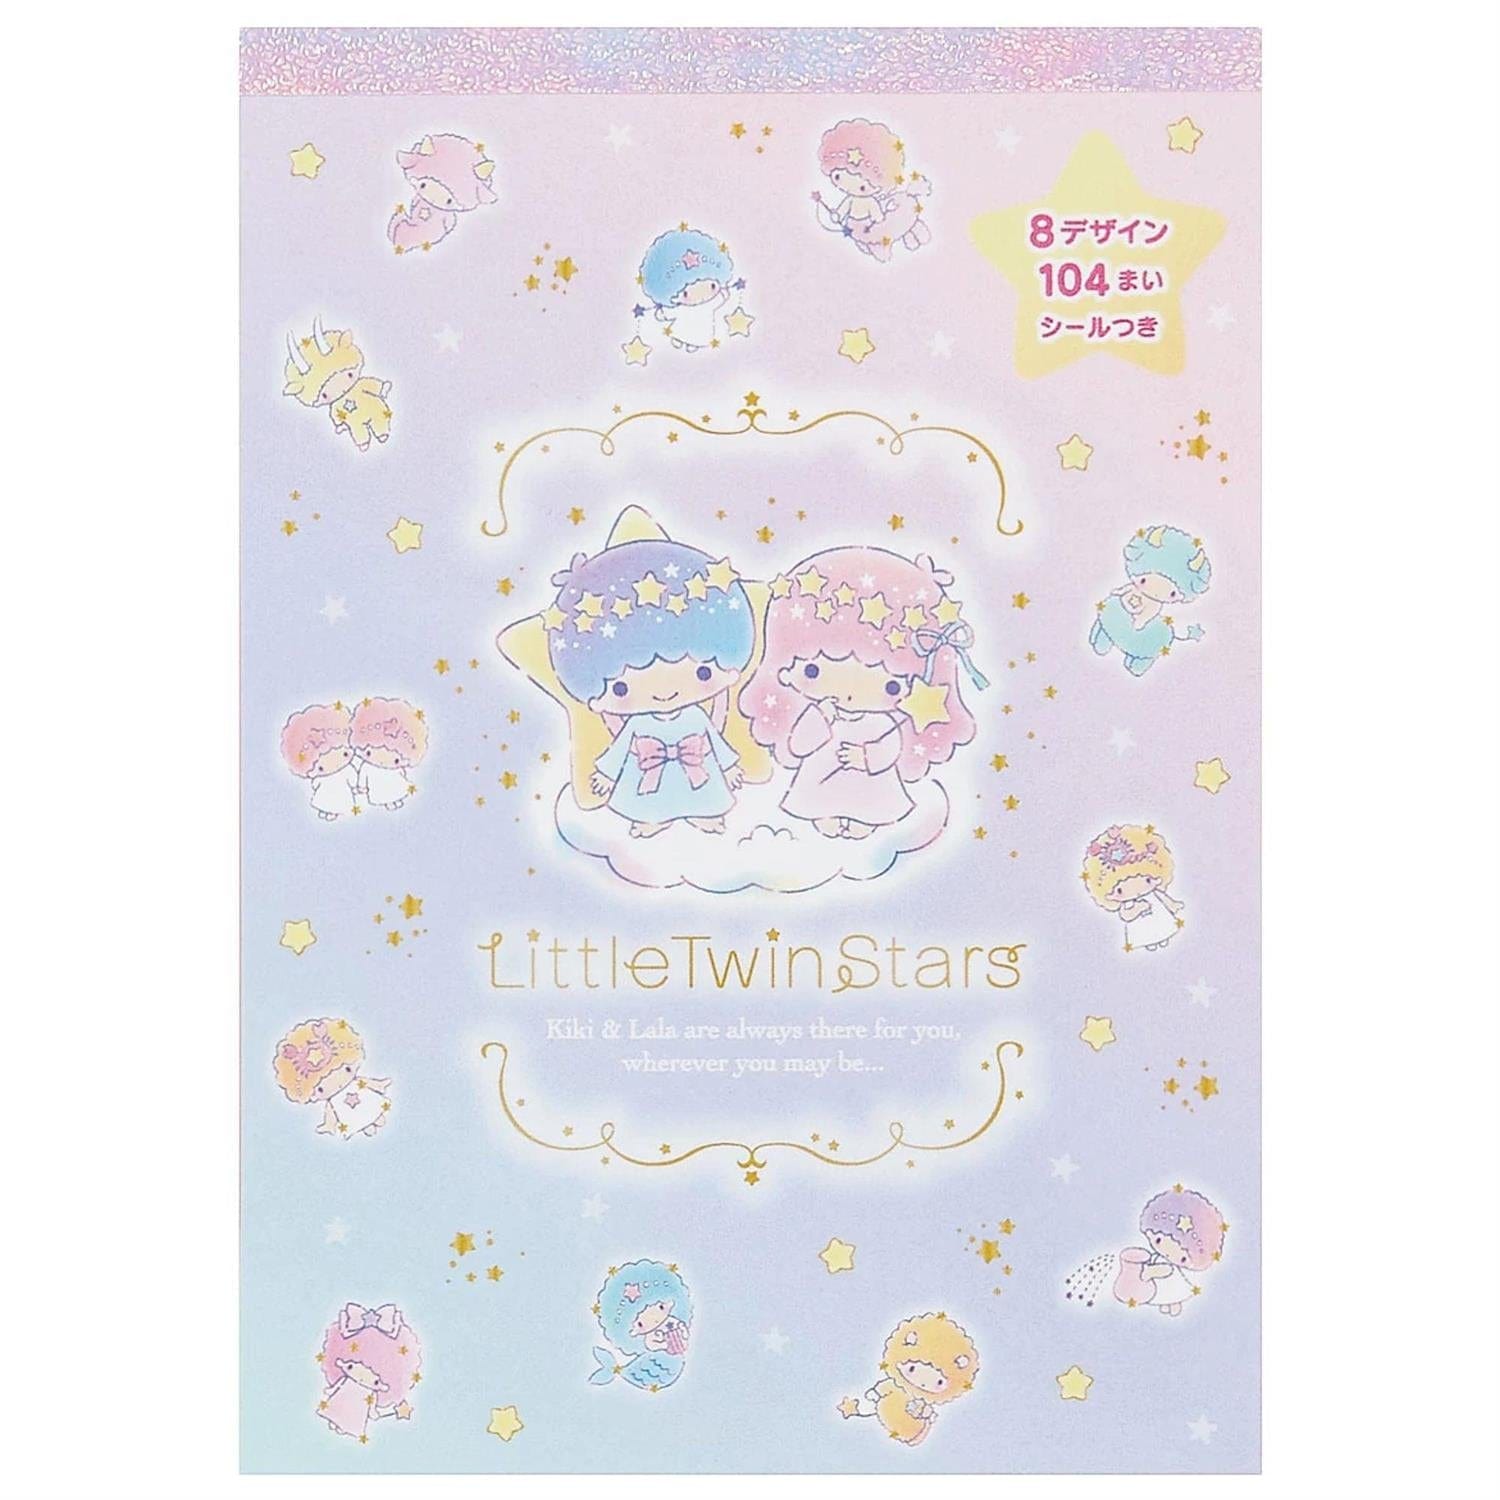 Little Twin Stars Memo Pad with Stickers